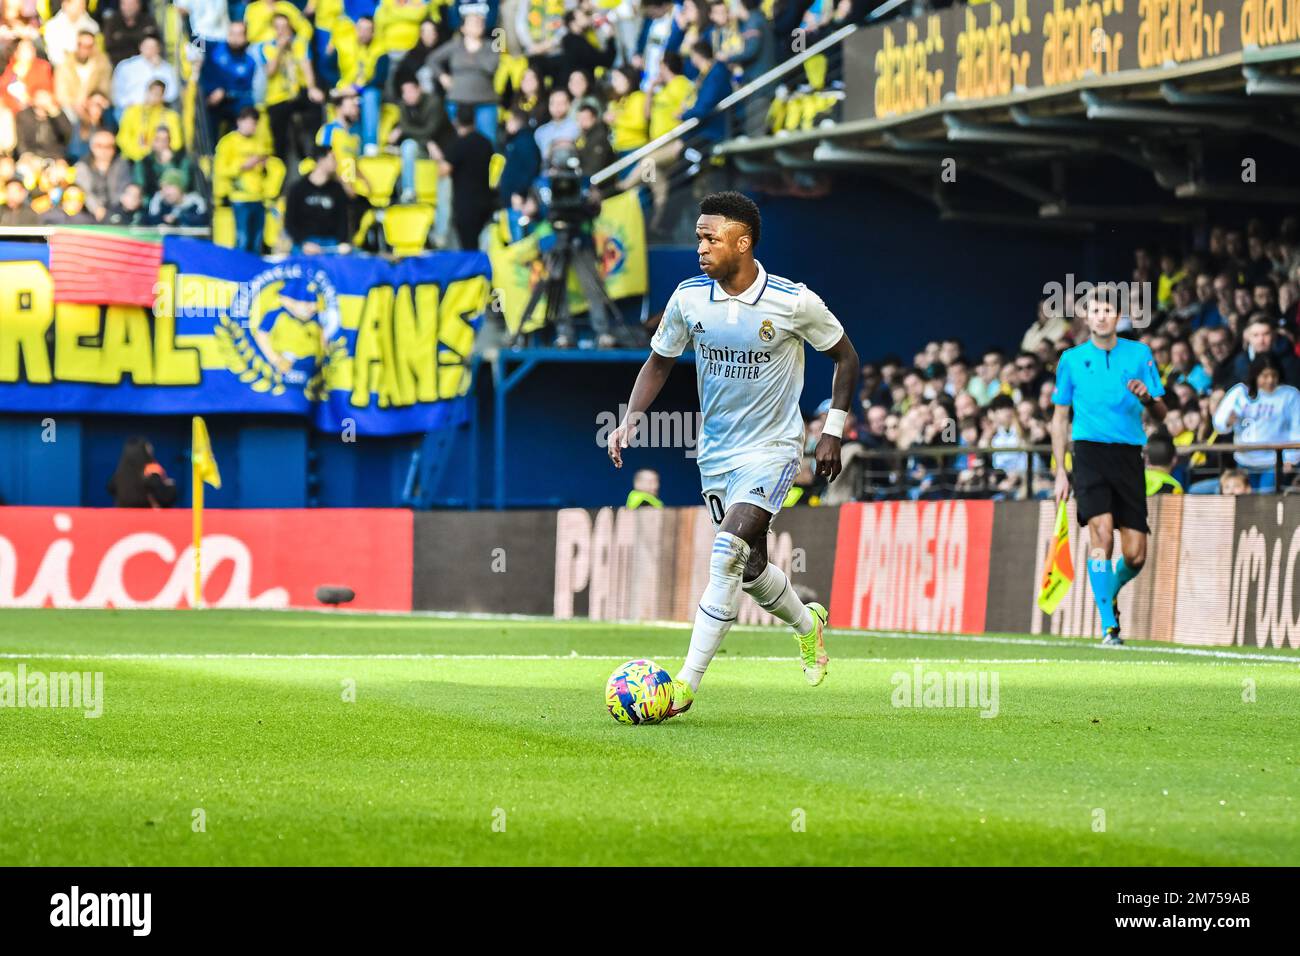 VILLARREAL, SPAIN - JANUARY 7: Vinicius Jr of Real Madrid CF control the ball during the match between Villarreal CF and Real Madrid CF of La Liga Santander on January 7, 2023 at Estadi de la Ceramica in Villarreal, Spain. (Photo by Samuel Carreño/ PX Images) Credit: Px Images/Alamy Live News Stock Photo